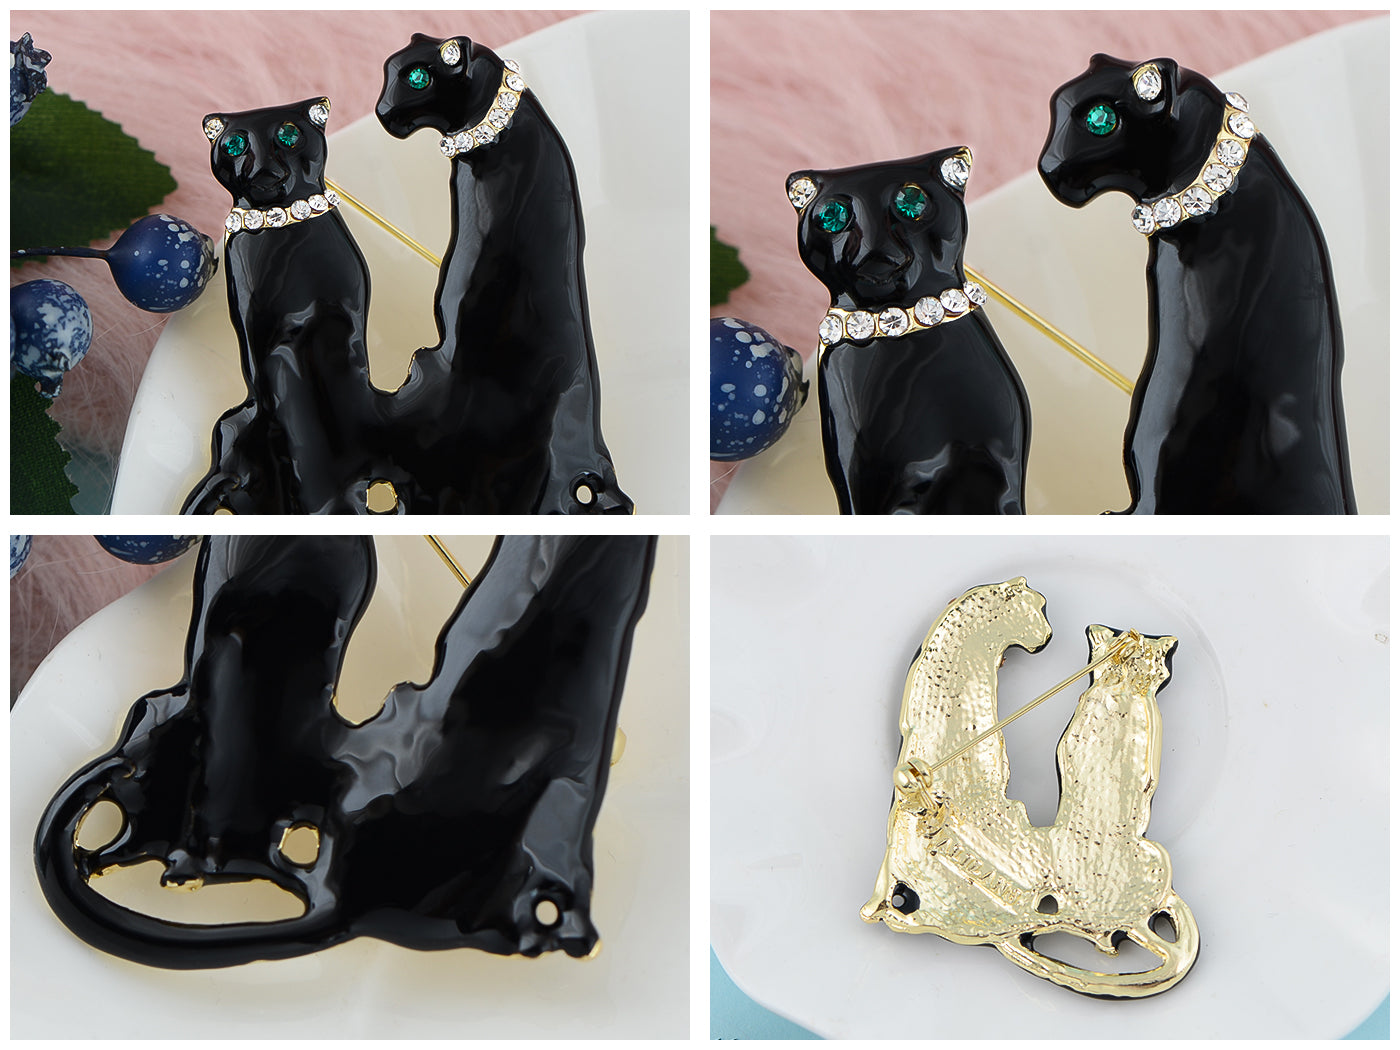 Tuquoise Blue Eyed Spotted Leopard Family Twin Lover Brooch Pin